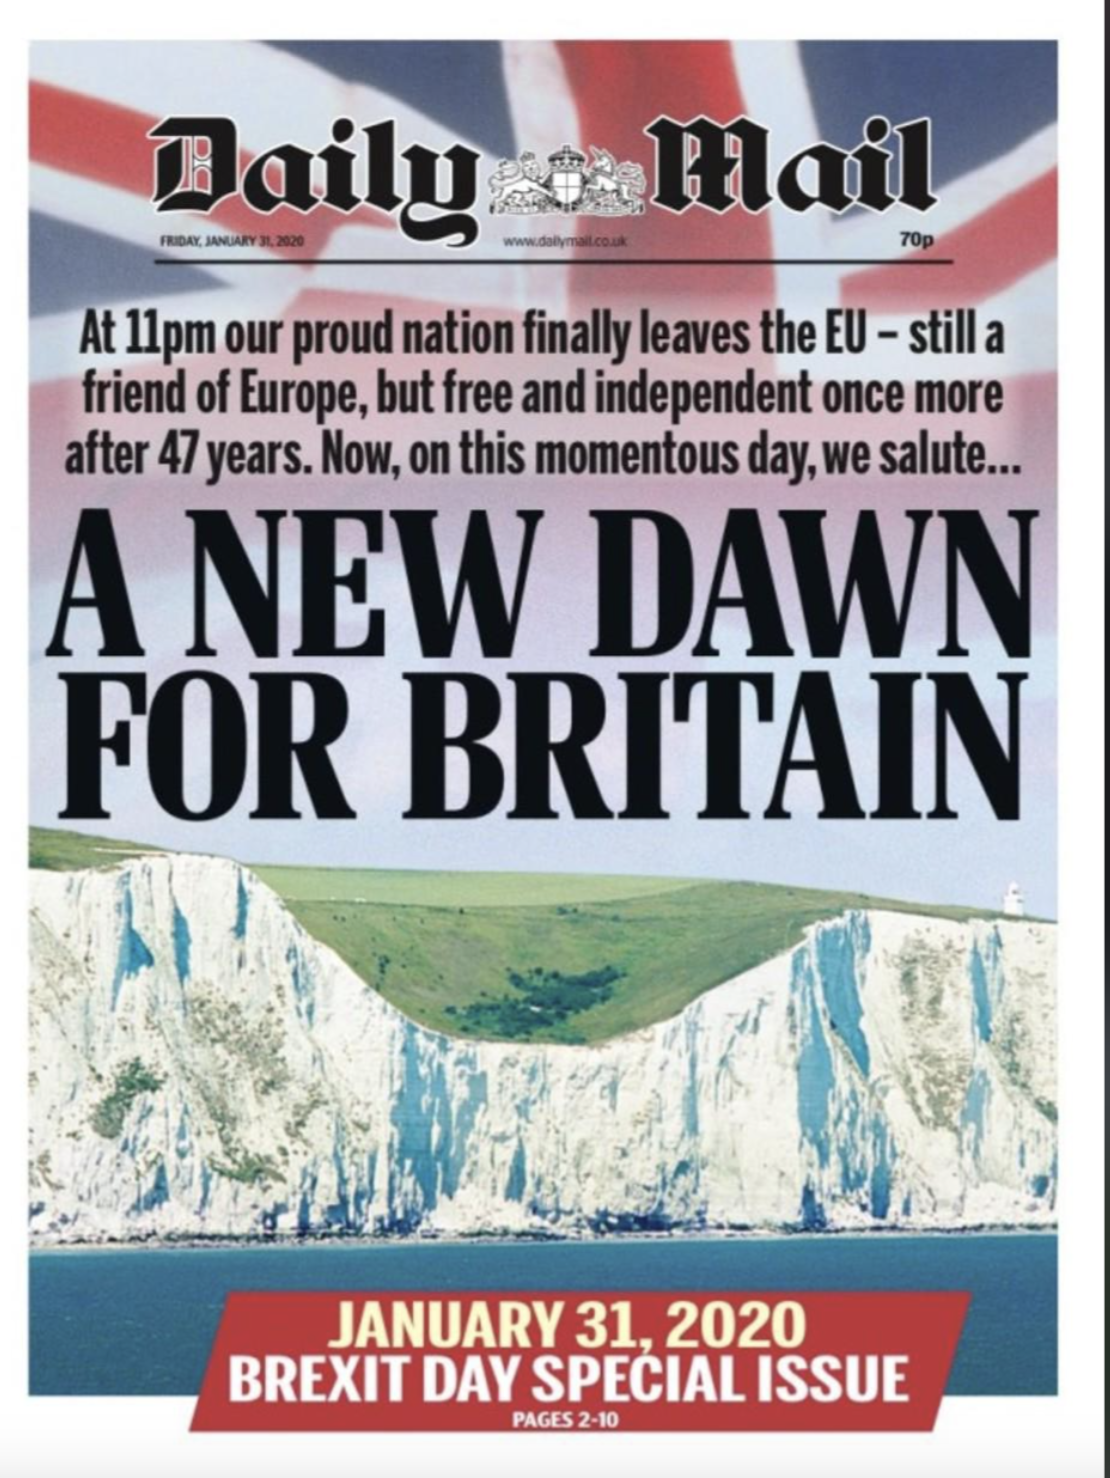 poster - Daily Mail At 11pm our proud nation finally leaves the Eu still a friend of Europe, but free and independent once more after 47 years. Now, on this momentous day, we salute... A New Dawn For Britain Brexit Day Special Issue Pages 210